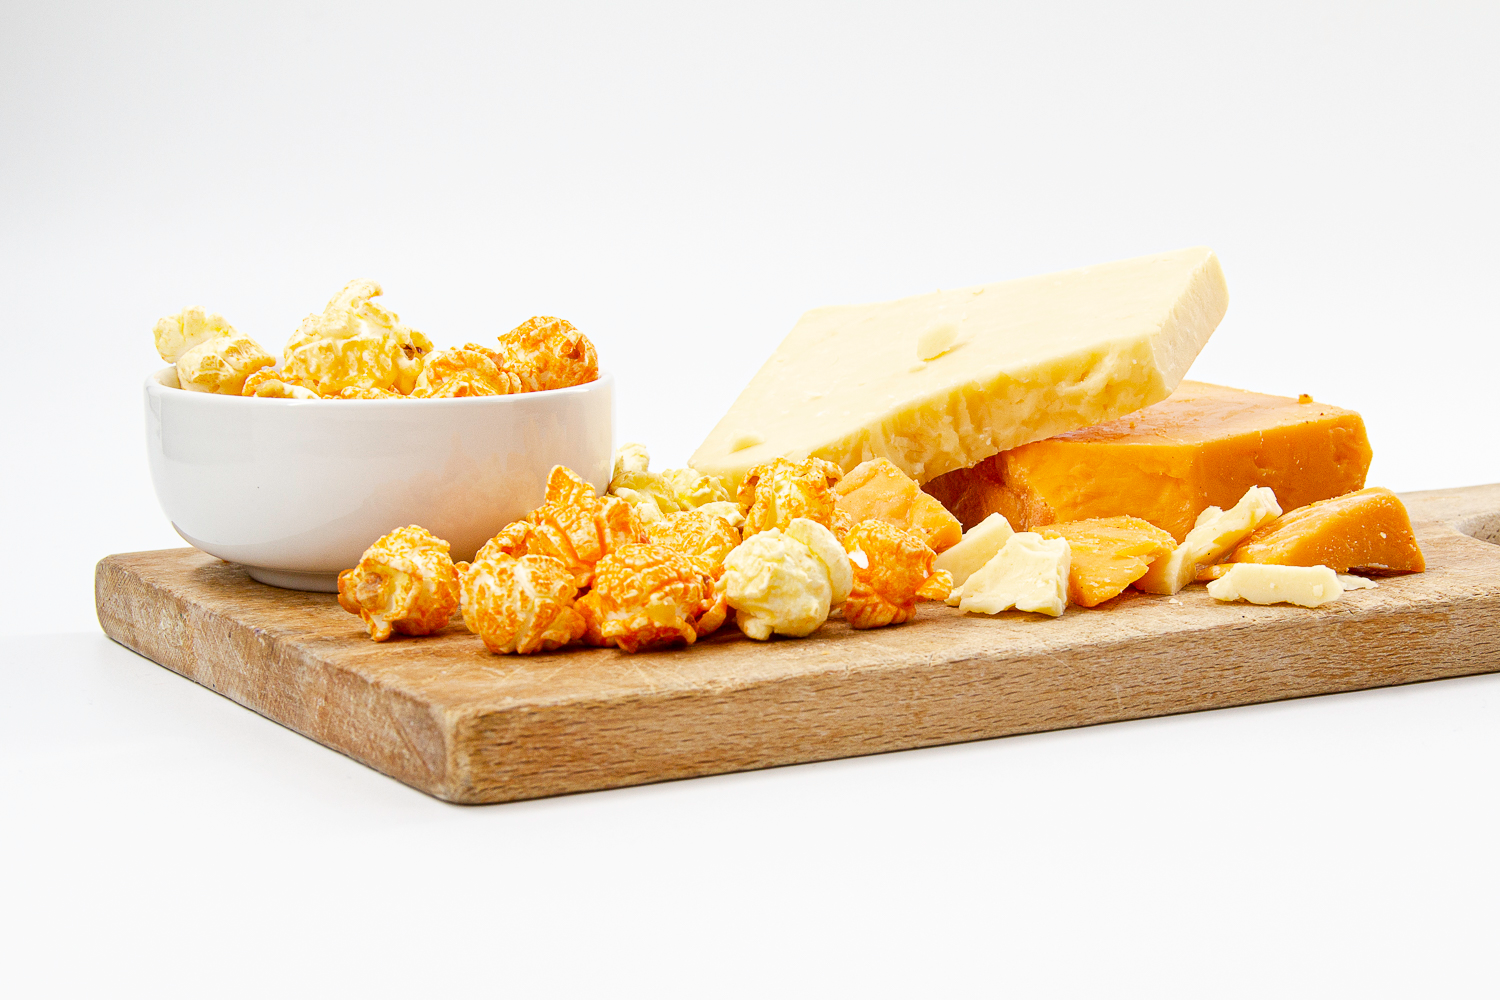 Savory Cheese Corn and White Cheddar Popcorn displayed on wood cutting board with cheddar cheese and white cheddar cheese chunks.